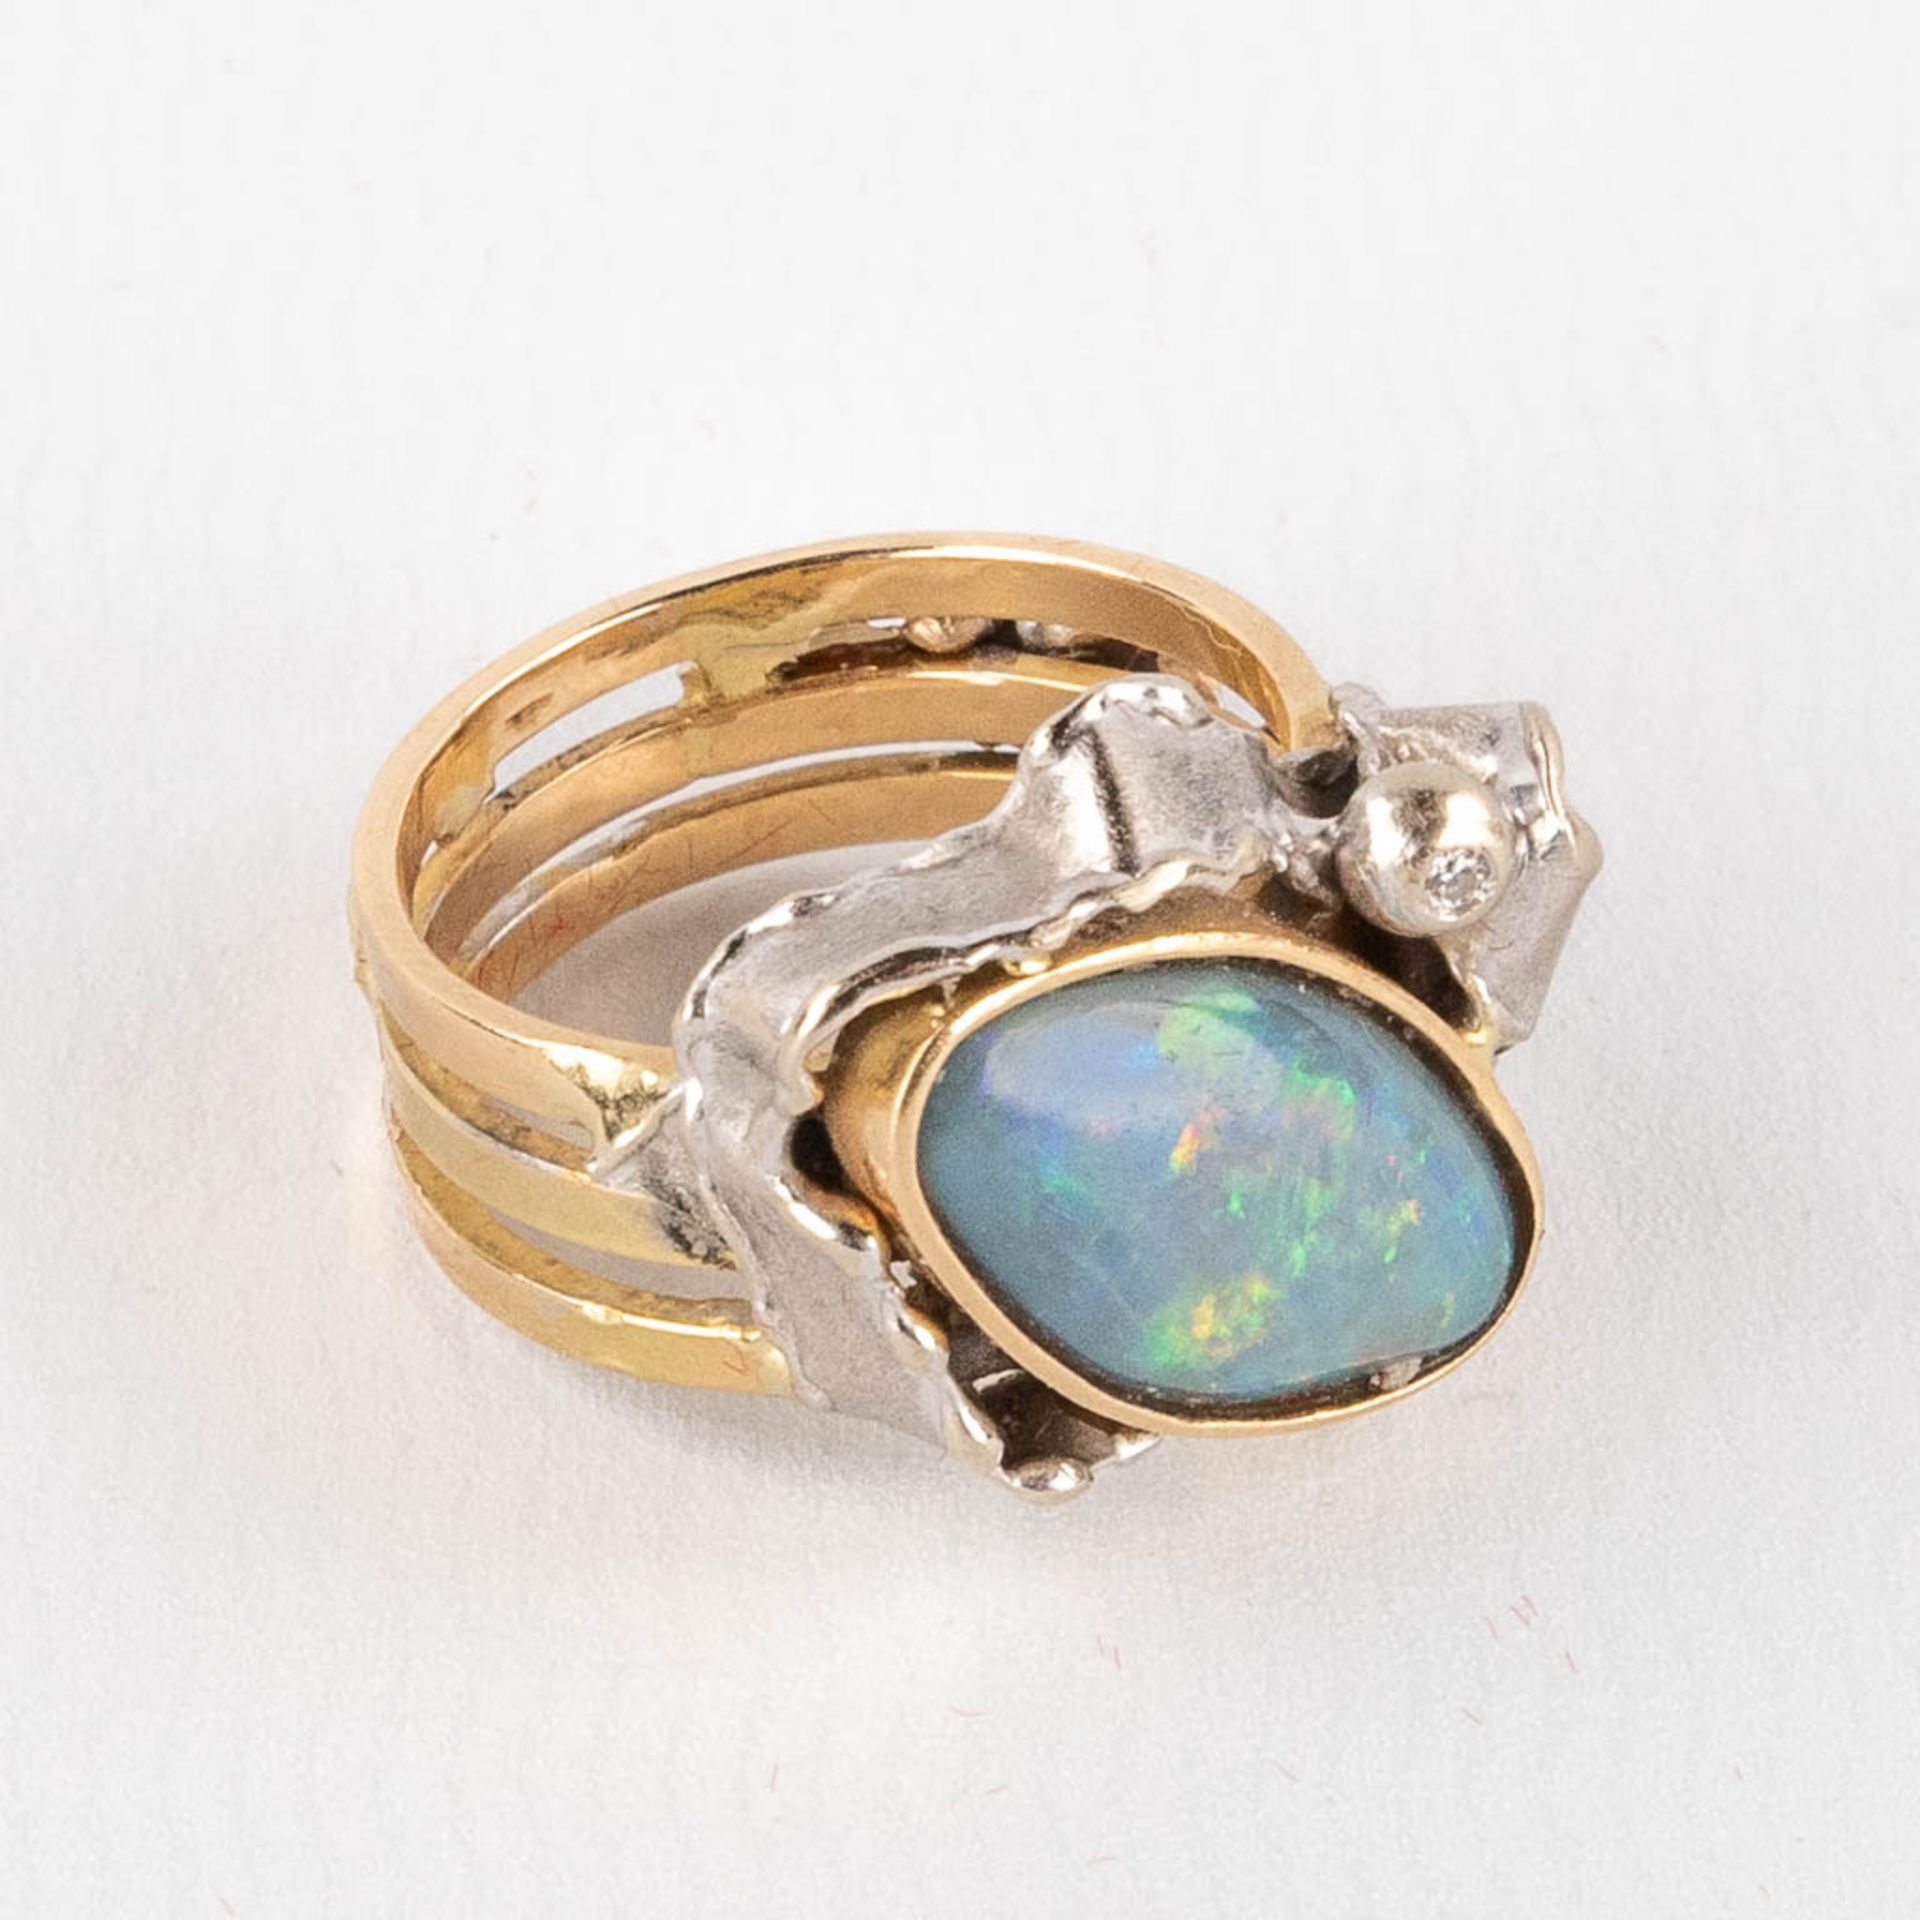 Aldighieri Gioielli, a ring with opal and old-cut diamond, 18ct yellow gold. Ring size 55. 8,8g. - Image 5 of 12